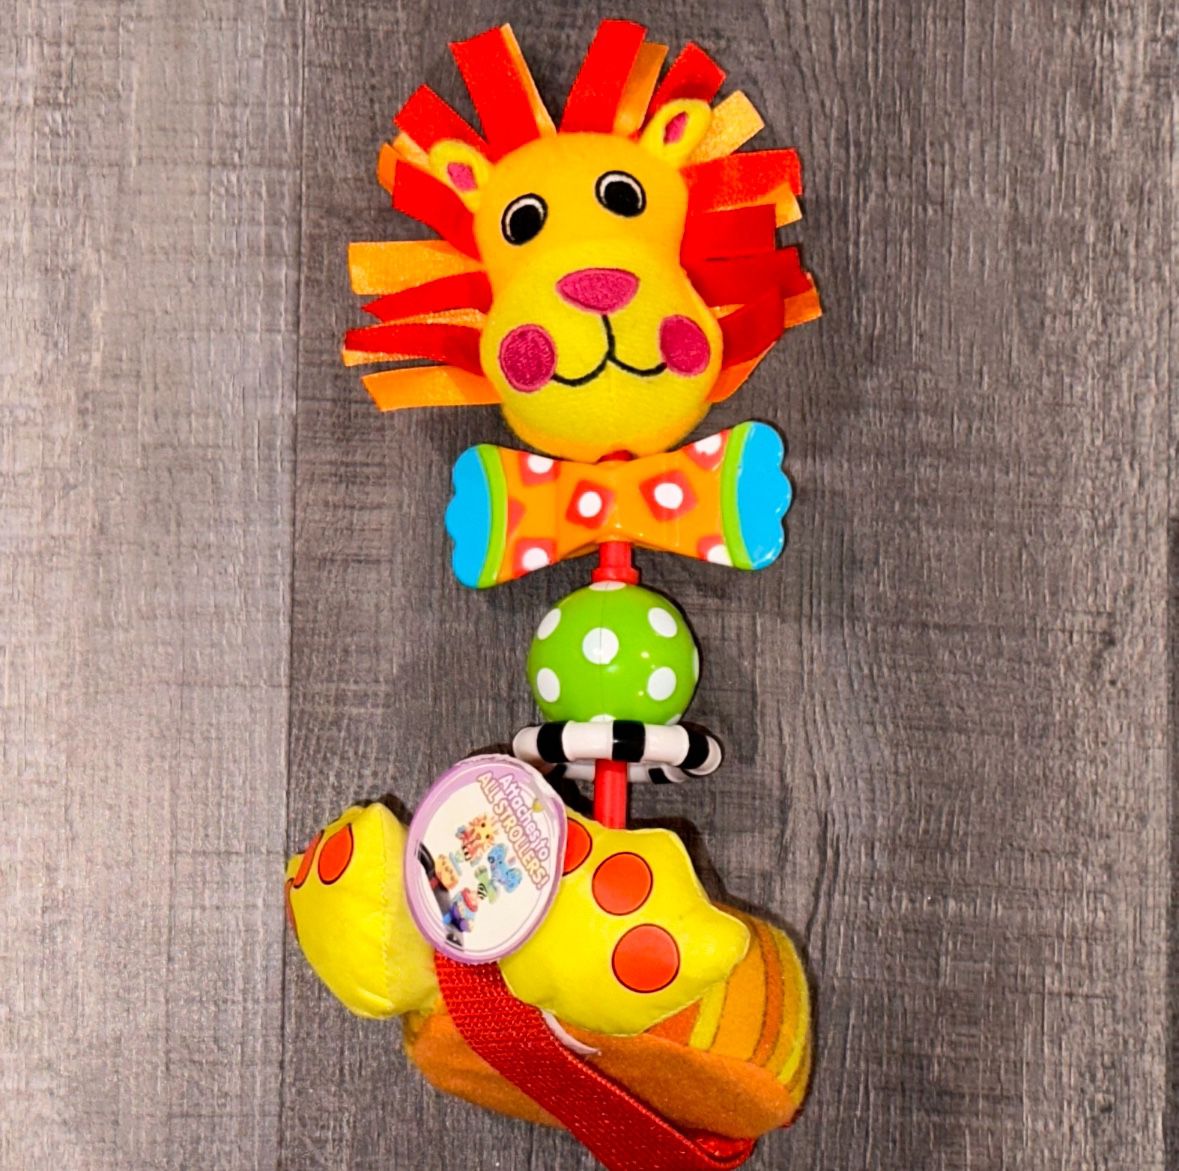 New Sassy Lion Stroller Rattle Toy